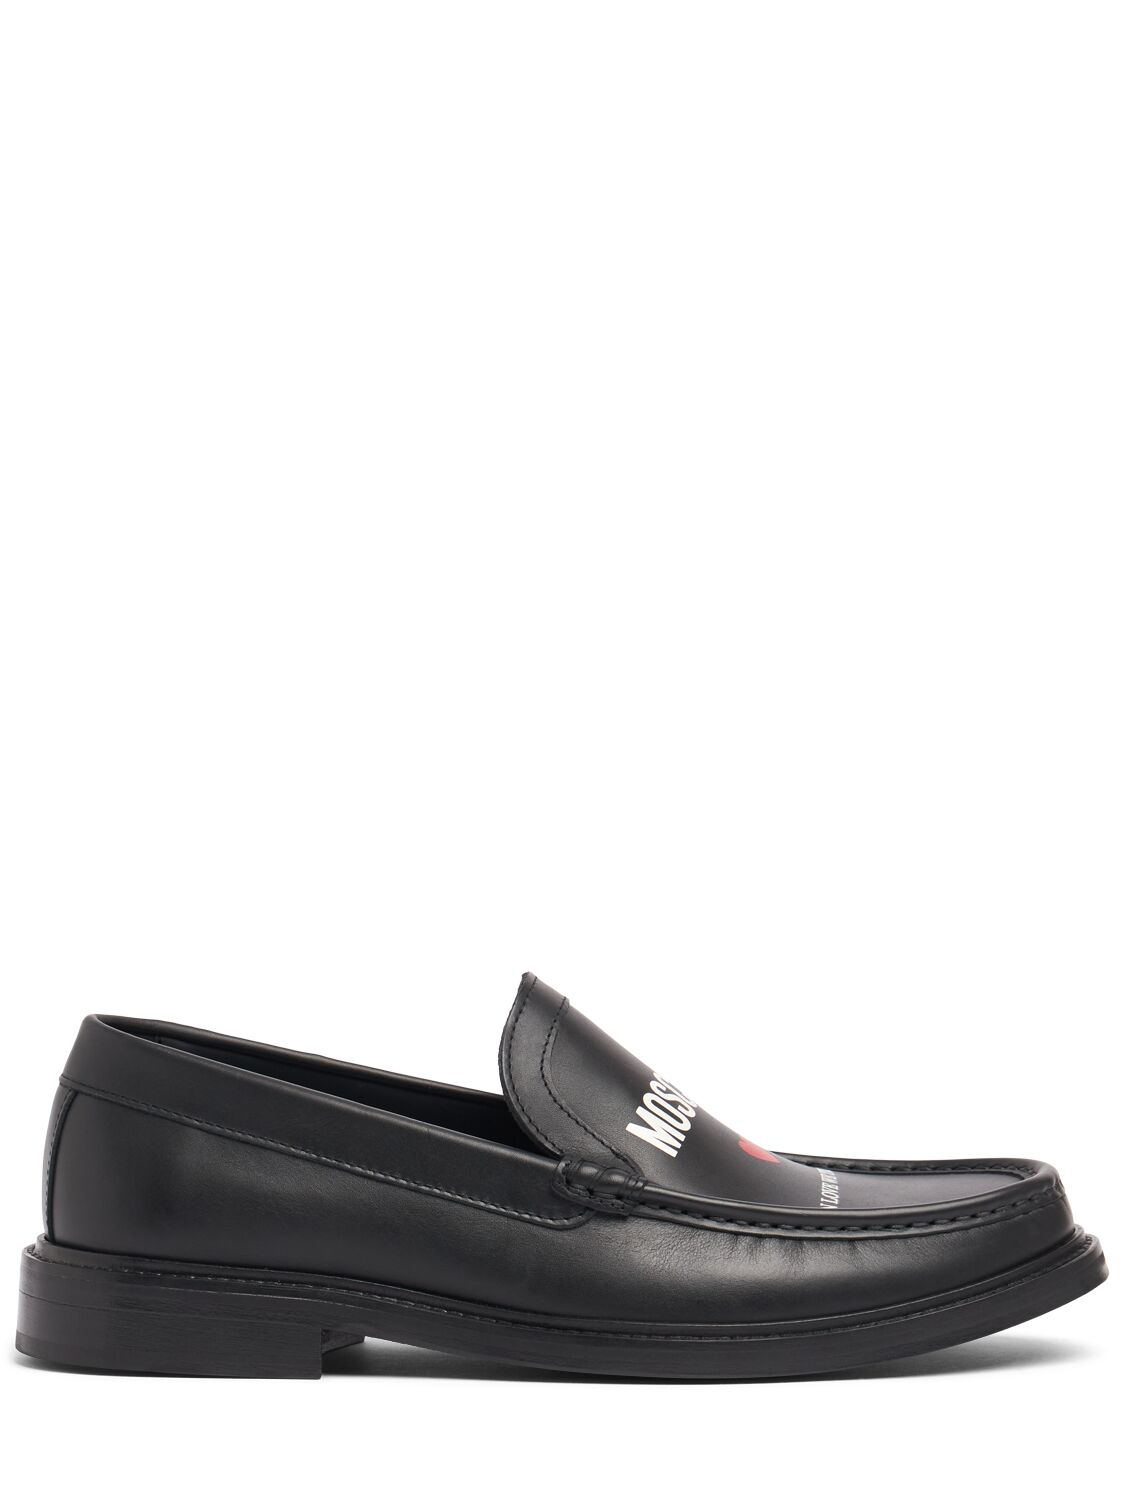 In Love We Trust Leather Loafers